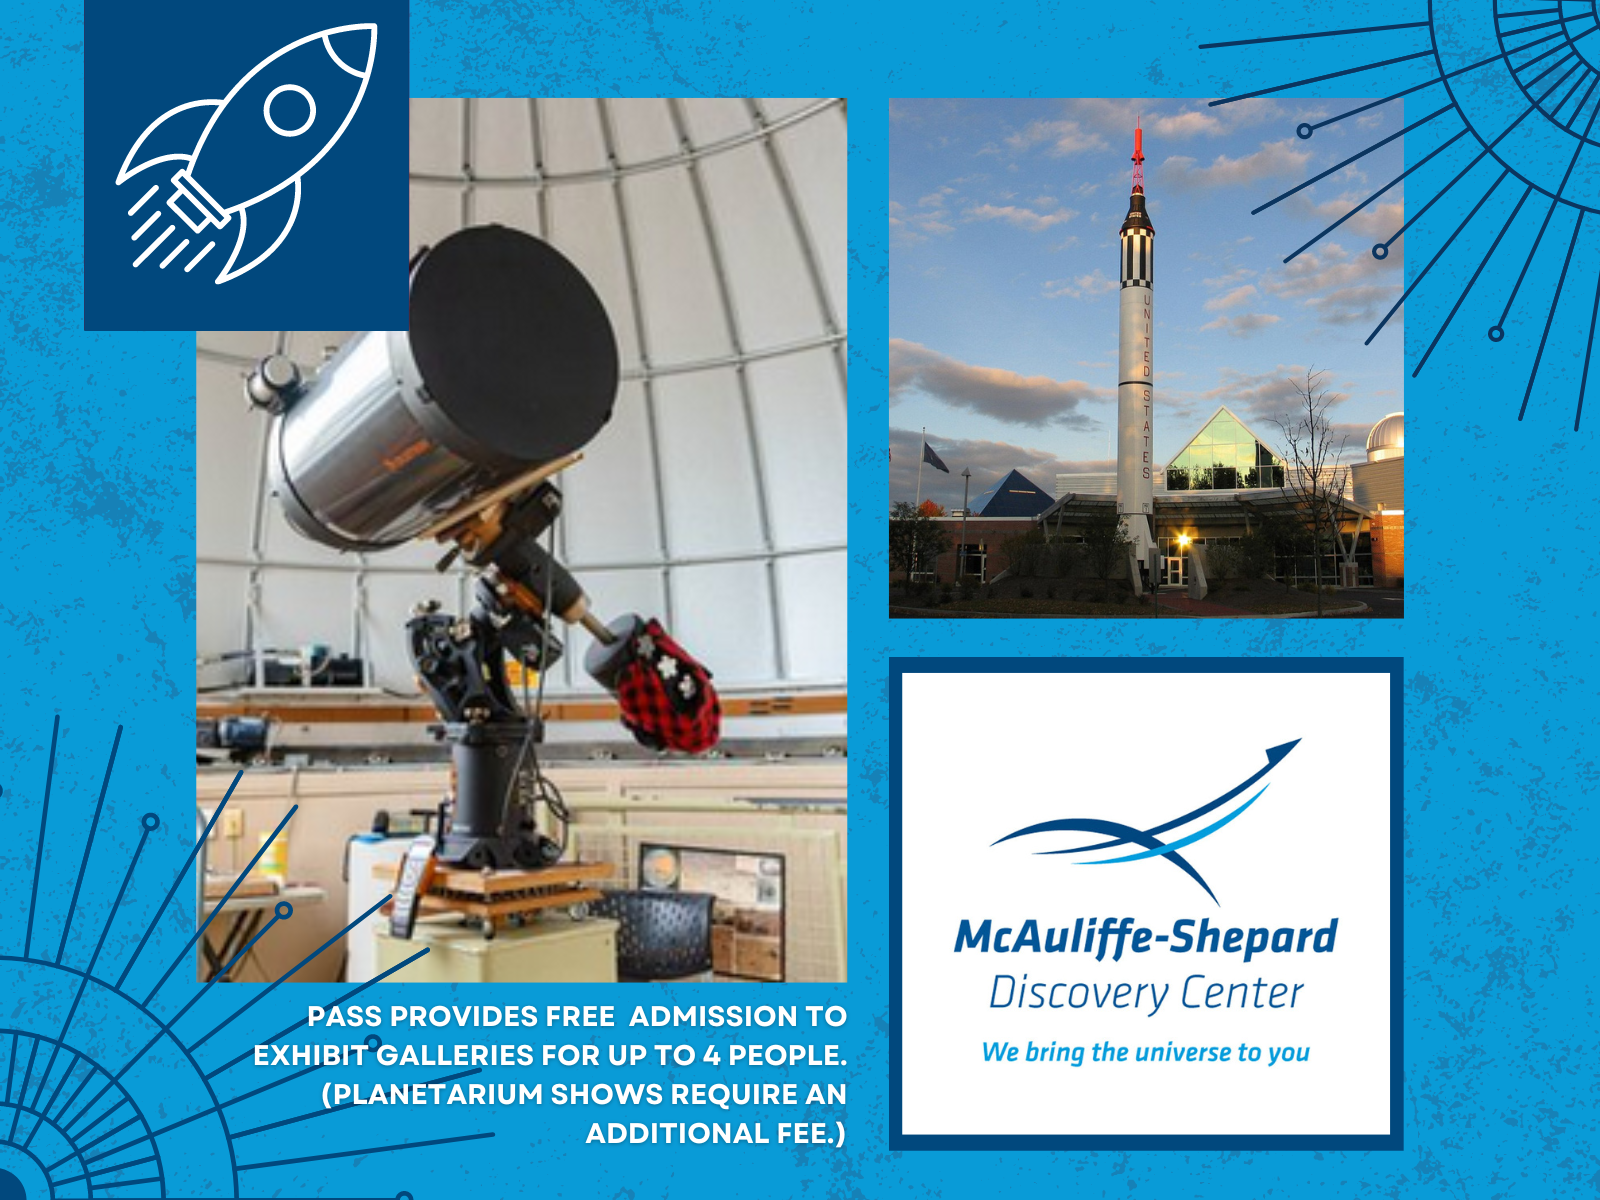 Visit the McAuliffe-Shepard Discovery Center